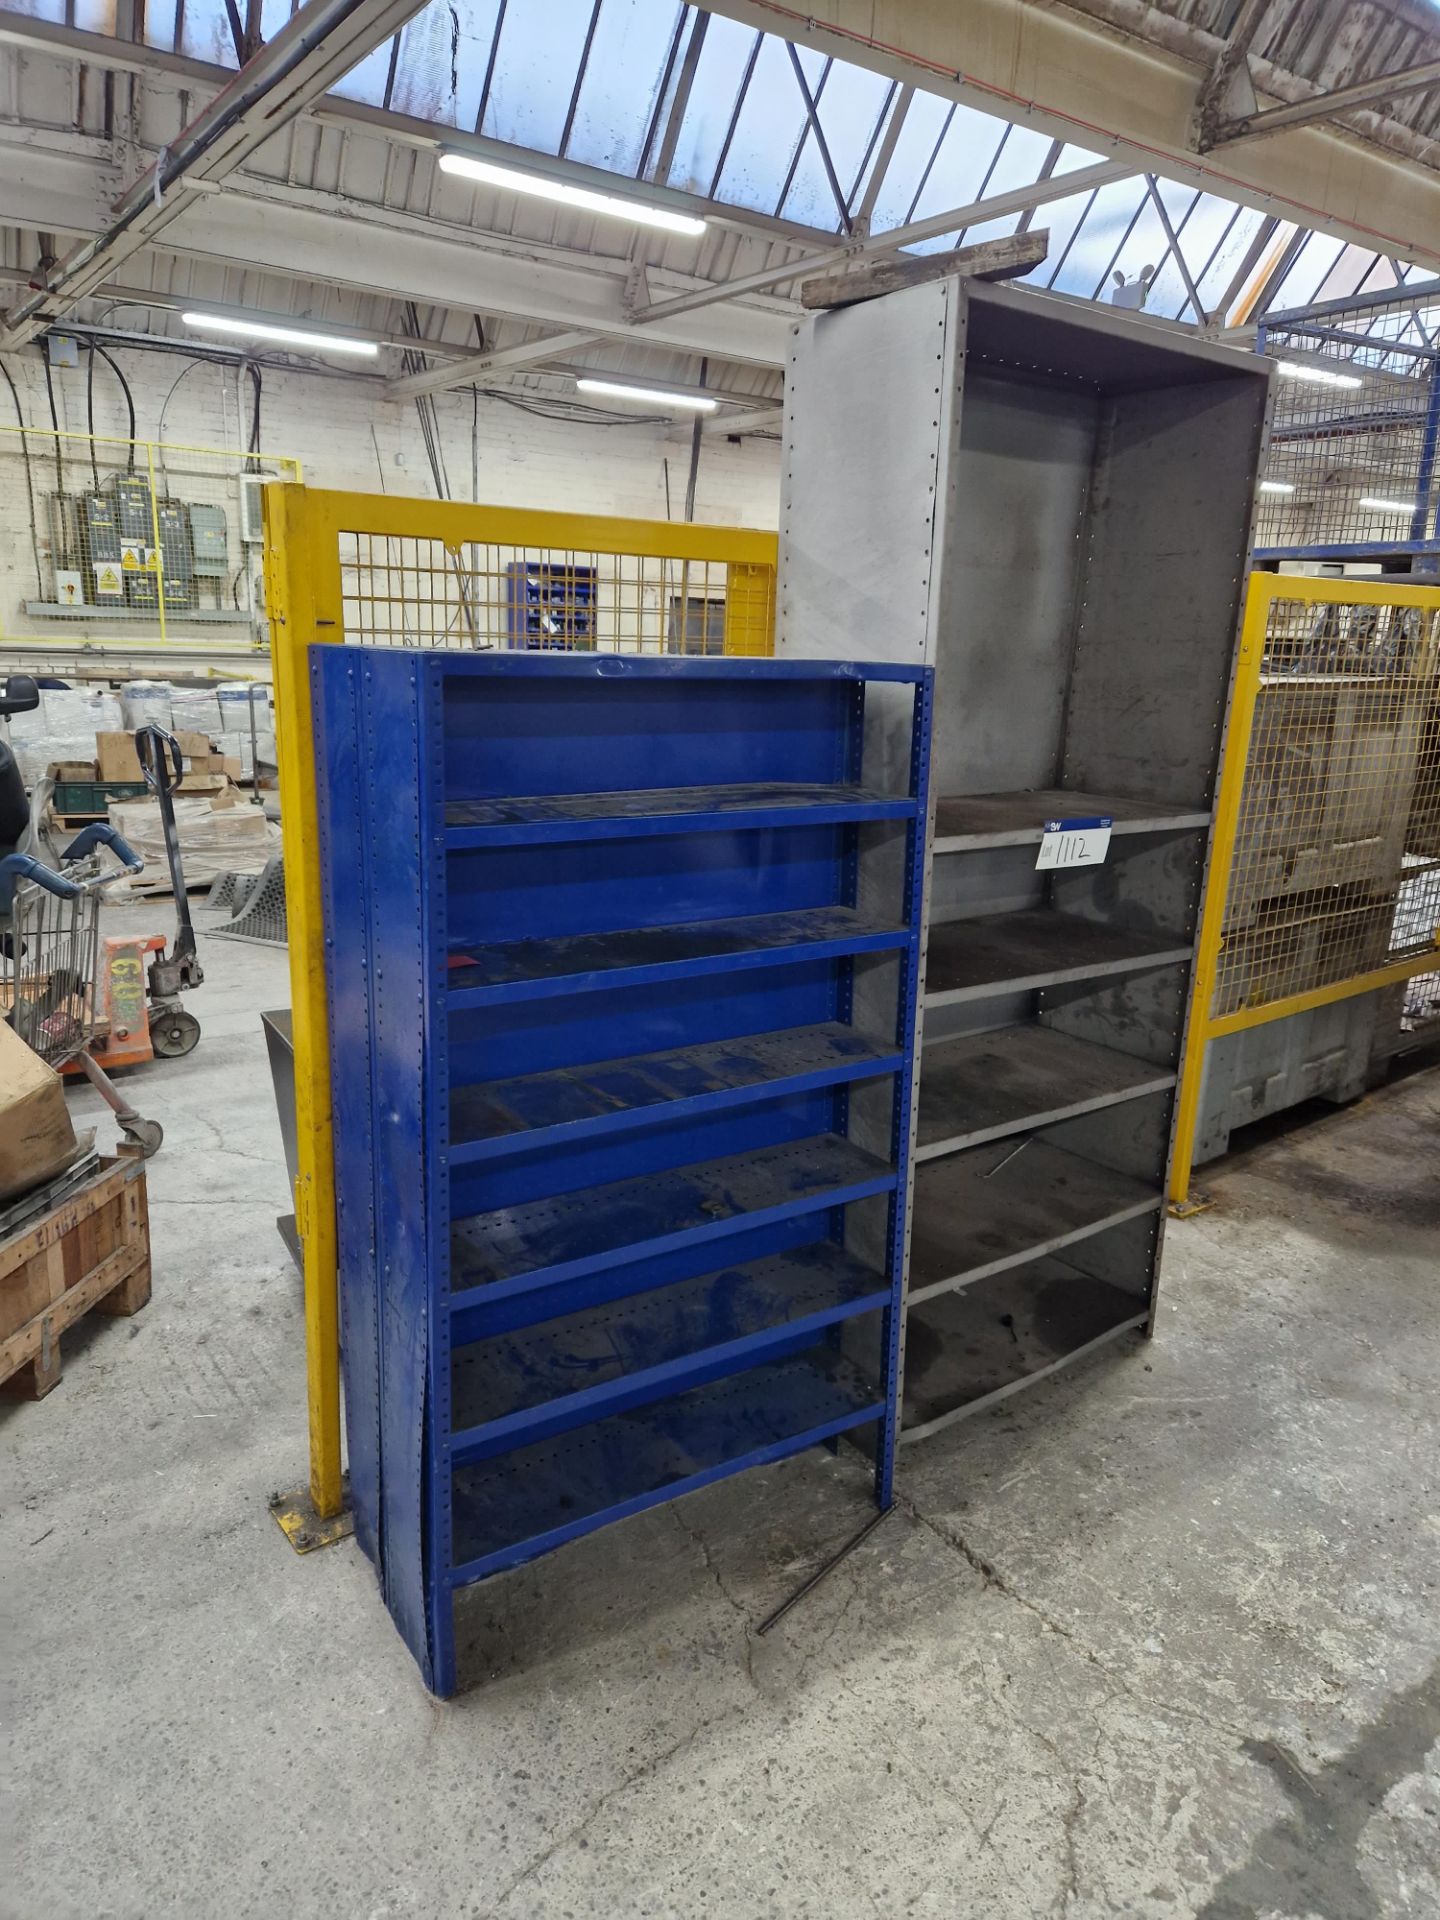 Metal Double Sided 6 Tier Shelving Unit and 5 Tier Shelving Unit Please read the following important